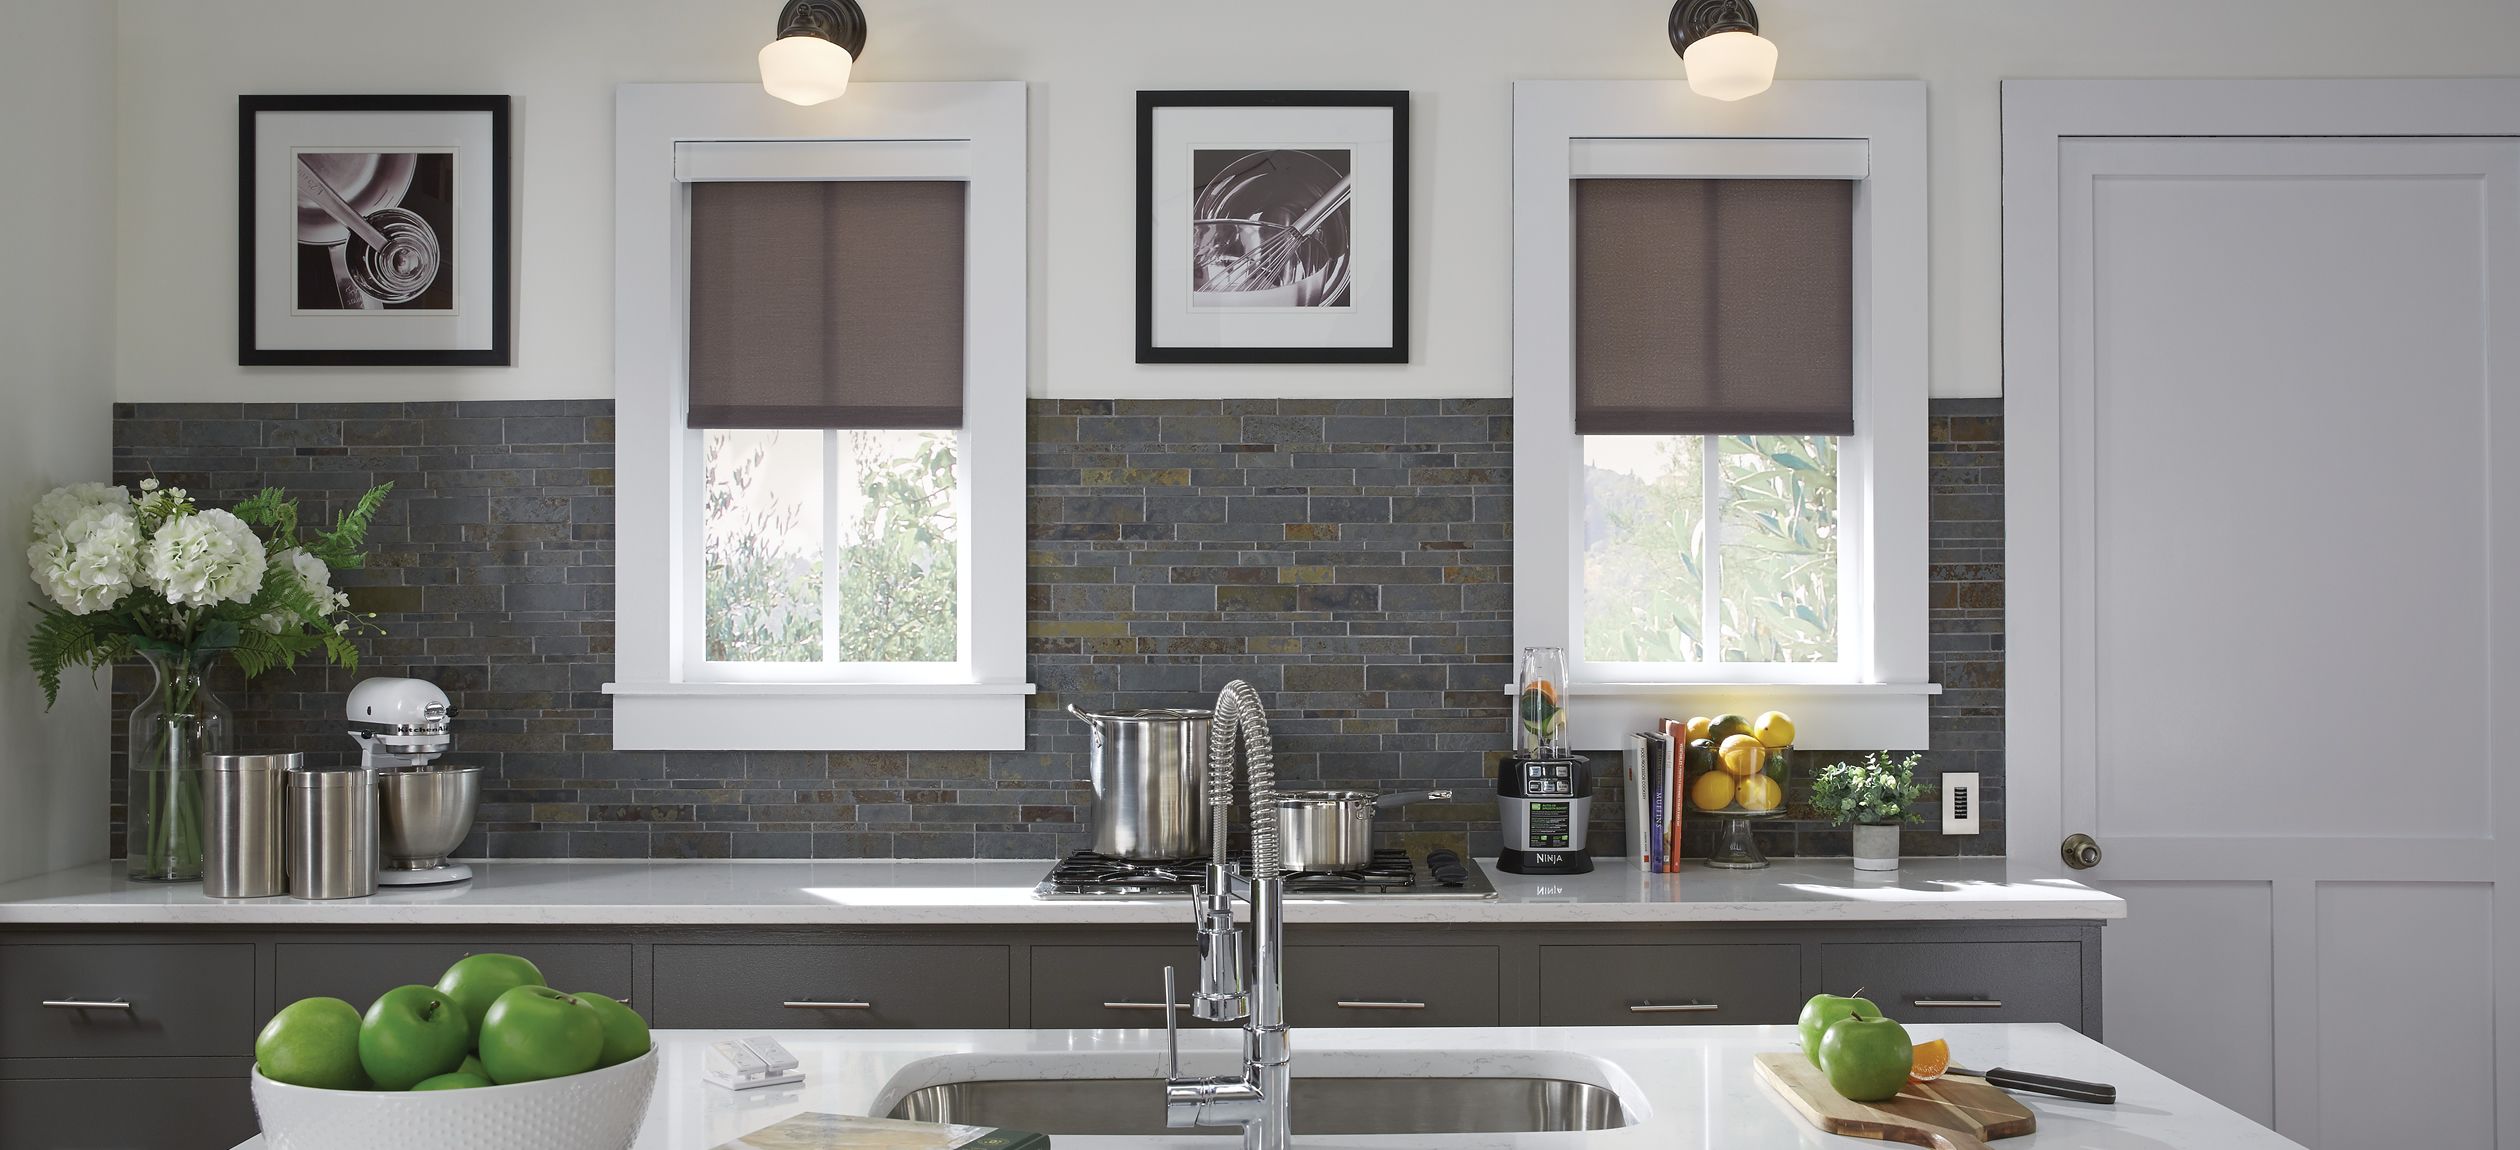 Grey and White kitchen image with window treatments from Lutron